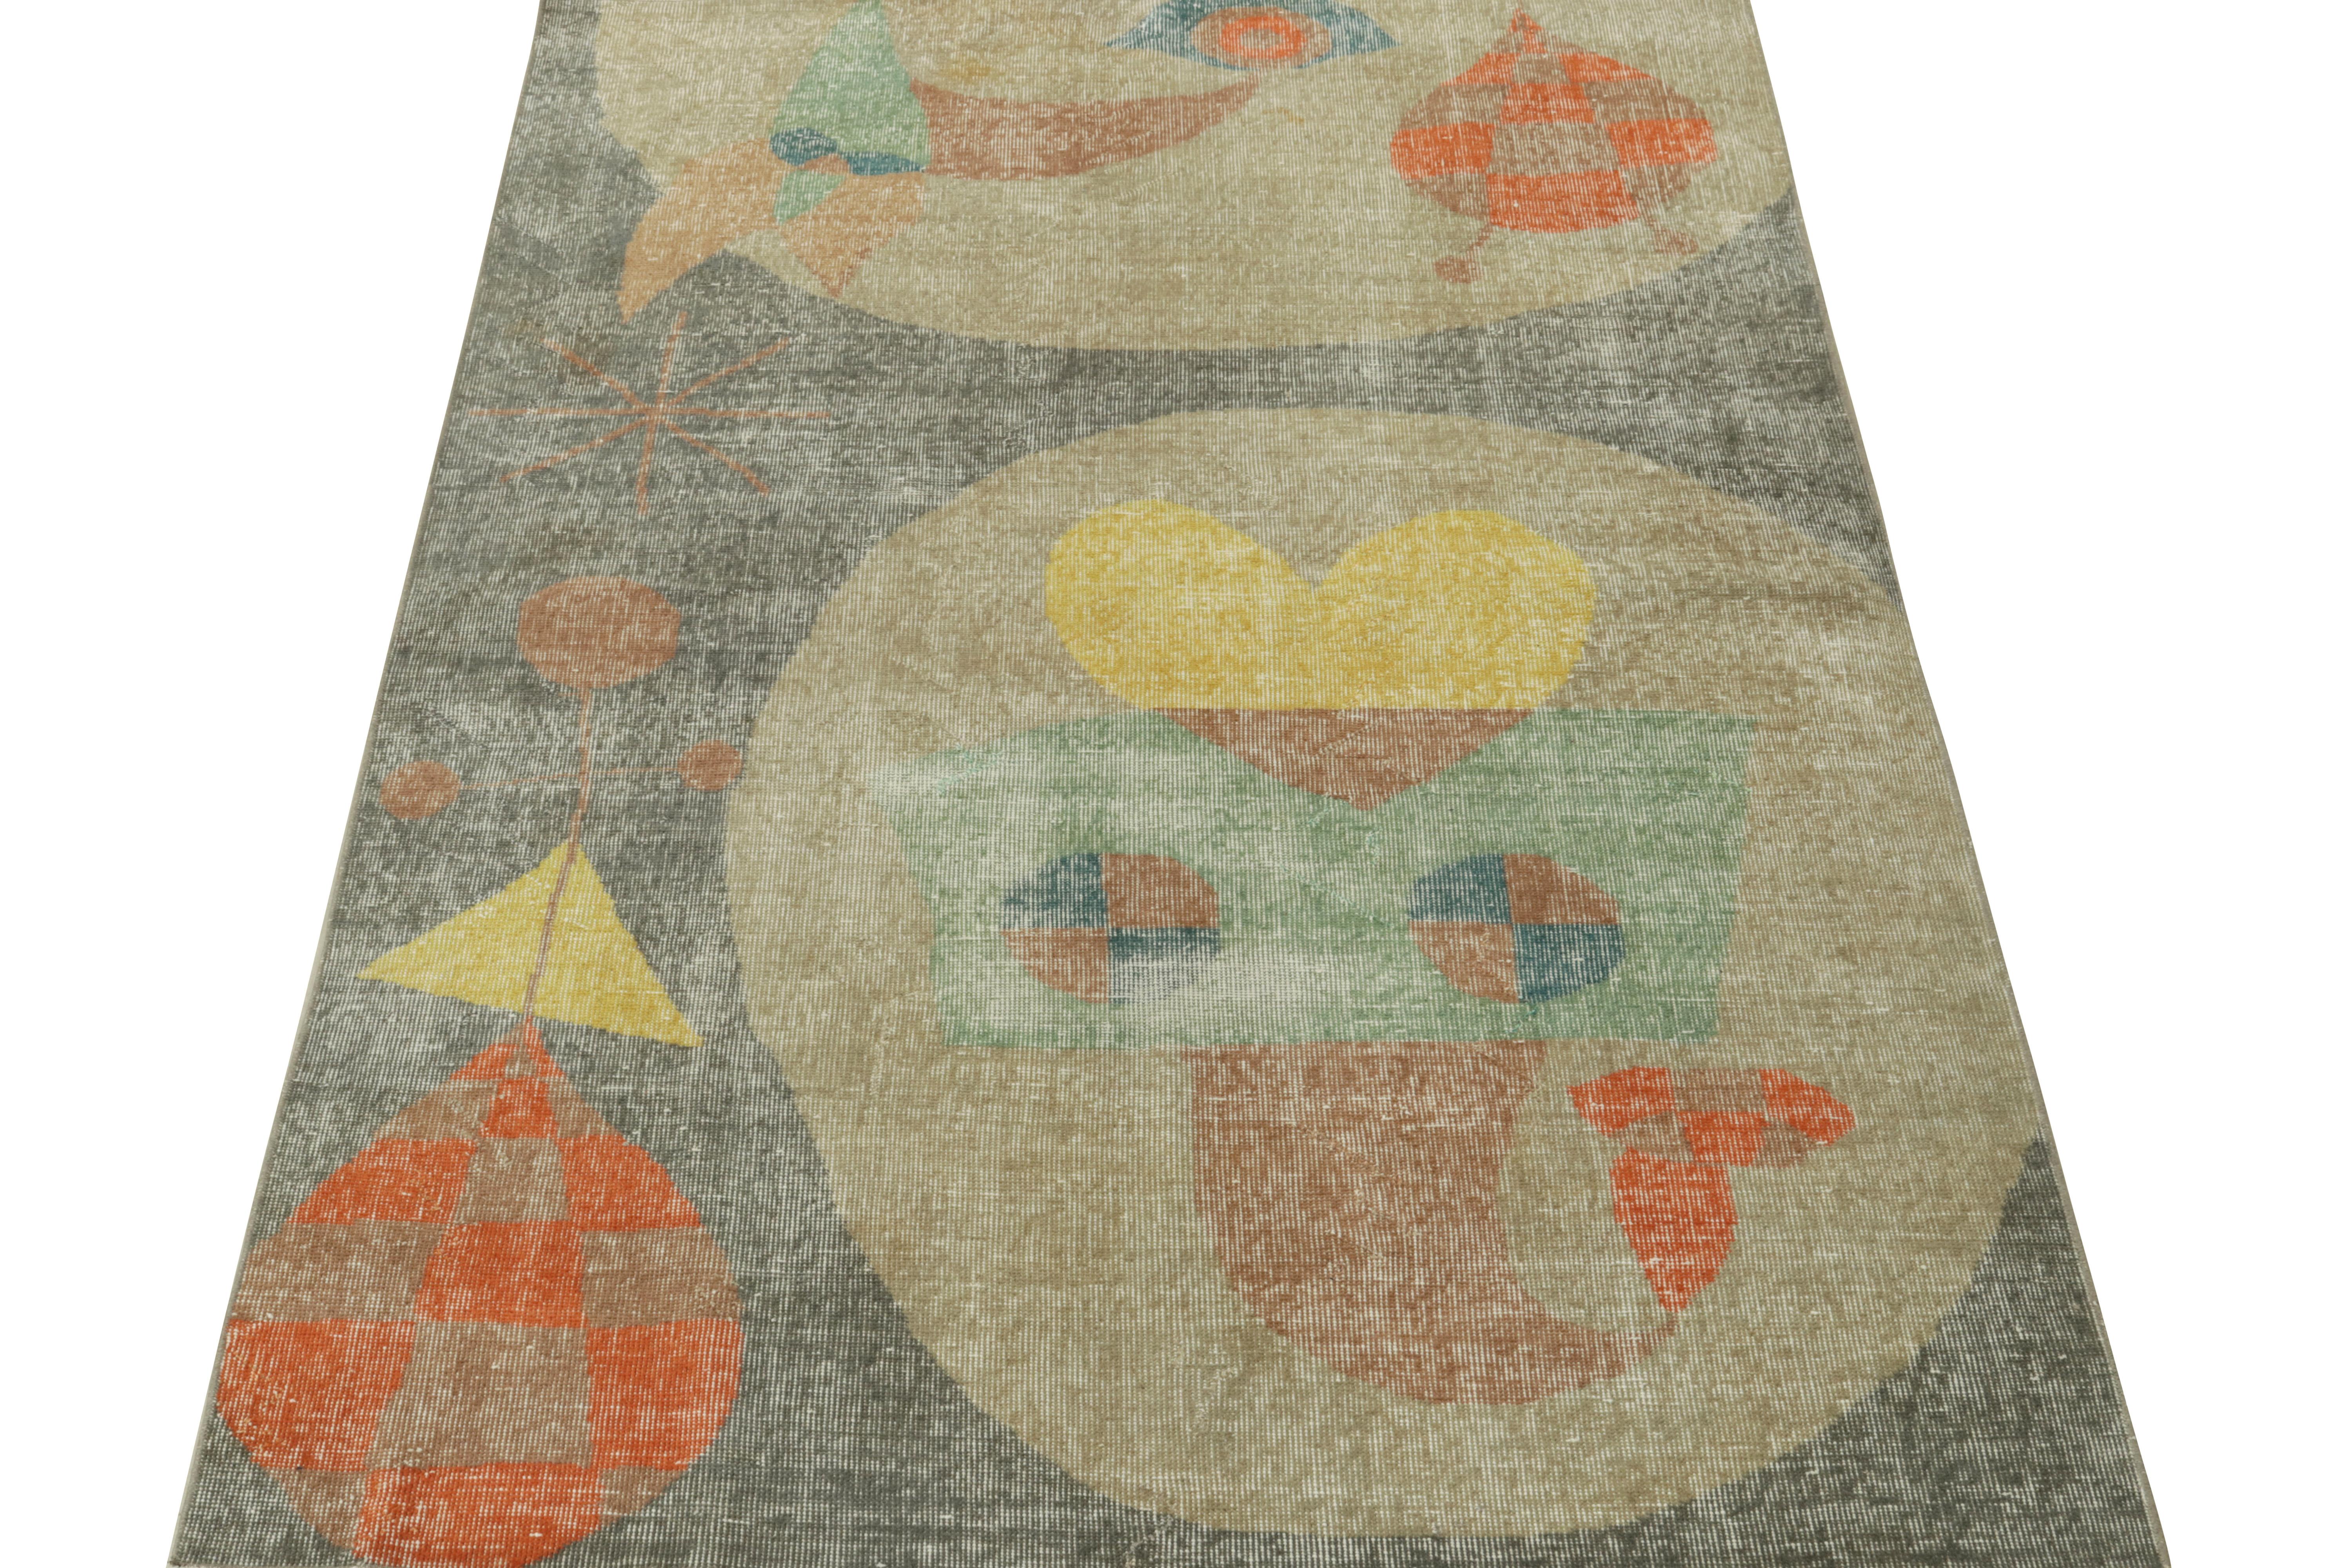 Hand-knotted in wool, a distressed style rug from the celebrated artist Zeki Muren with abstract and art deco inspirations is one of his latest pieces to join Rug & Kilim’s Midcentury Pasha collection. This Turkish drawing from circa 1960-1970